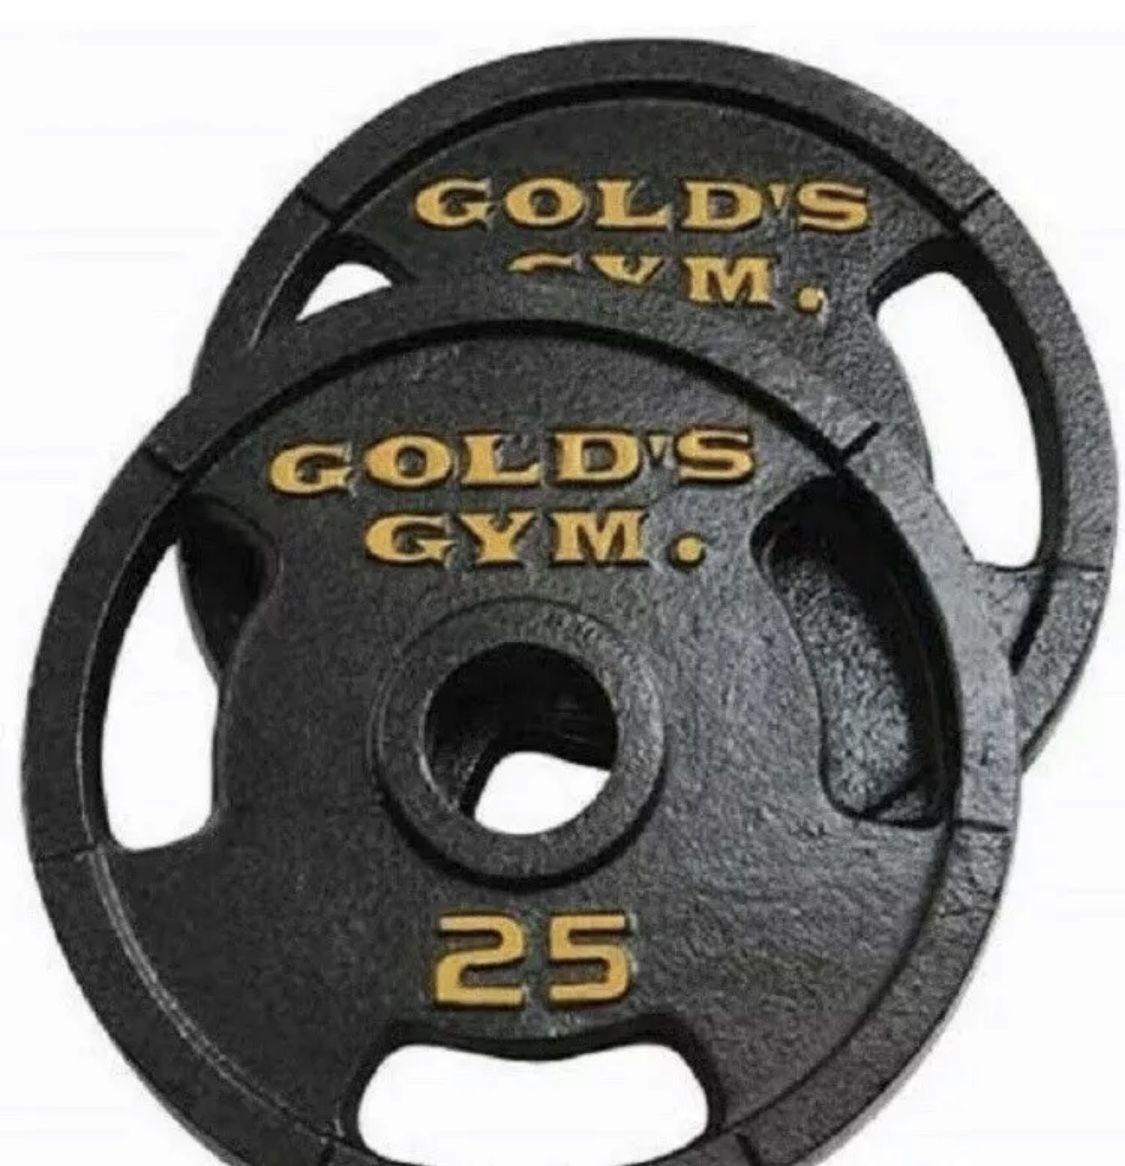 Golds Gym 50 lbs Olympic Plate Set of Two 25 lb Plate Weights